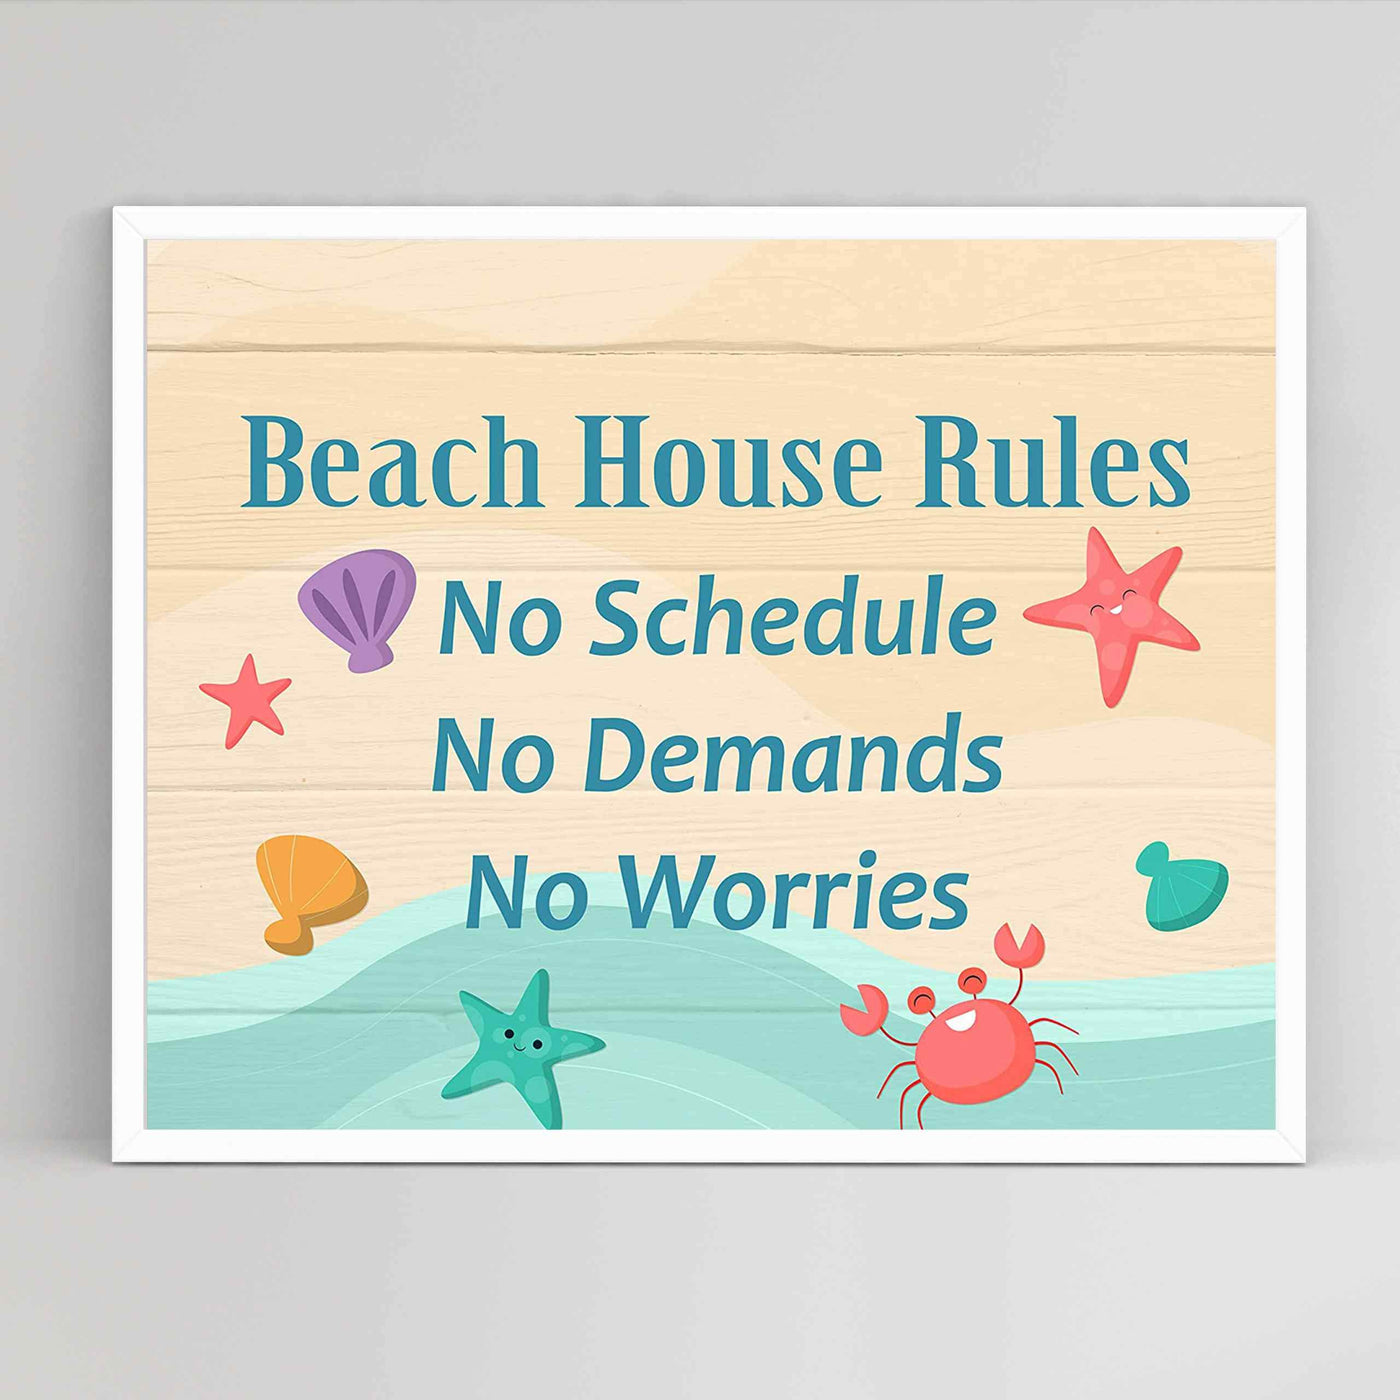 Beach House Rules-No Schedules, Demands, Worries Fun, Rustic Vacation Sign -10 x 8" Typographic Wall Print w/Replica Wood Design-Ready to Frame. Home-Cabin-Beach-Nautical Decor. Printed on Paper.